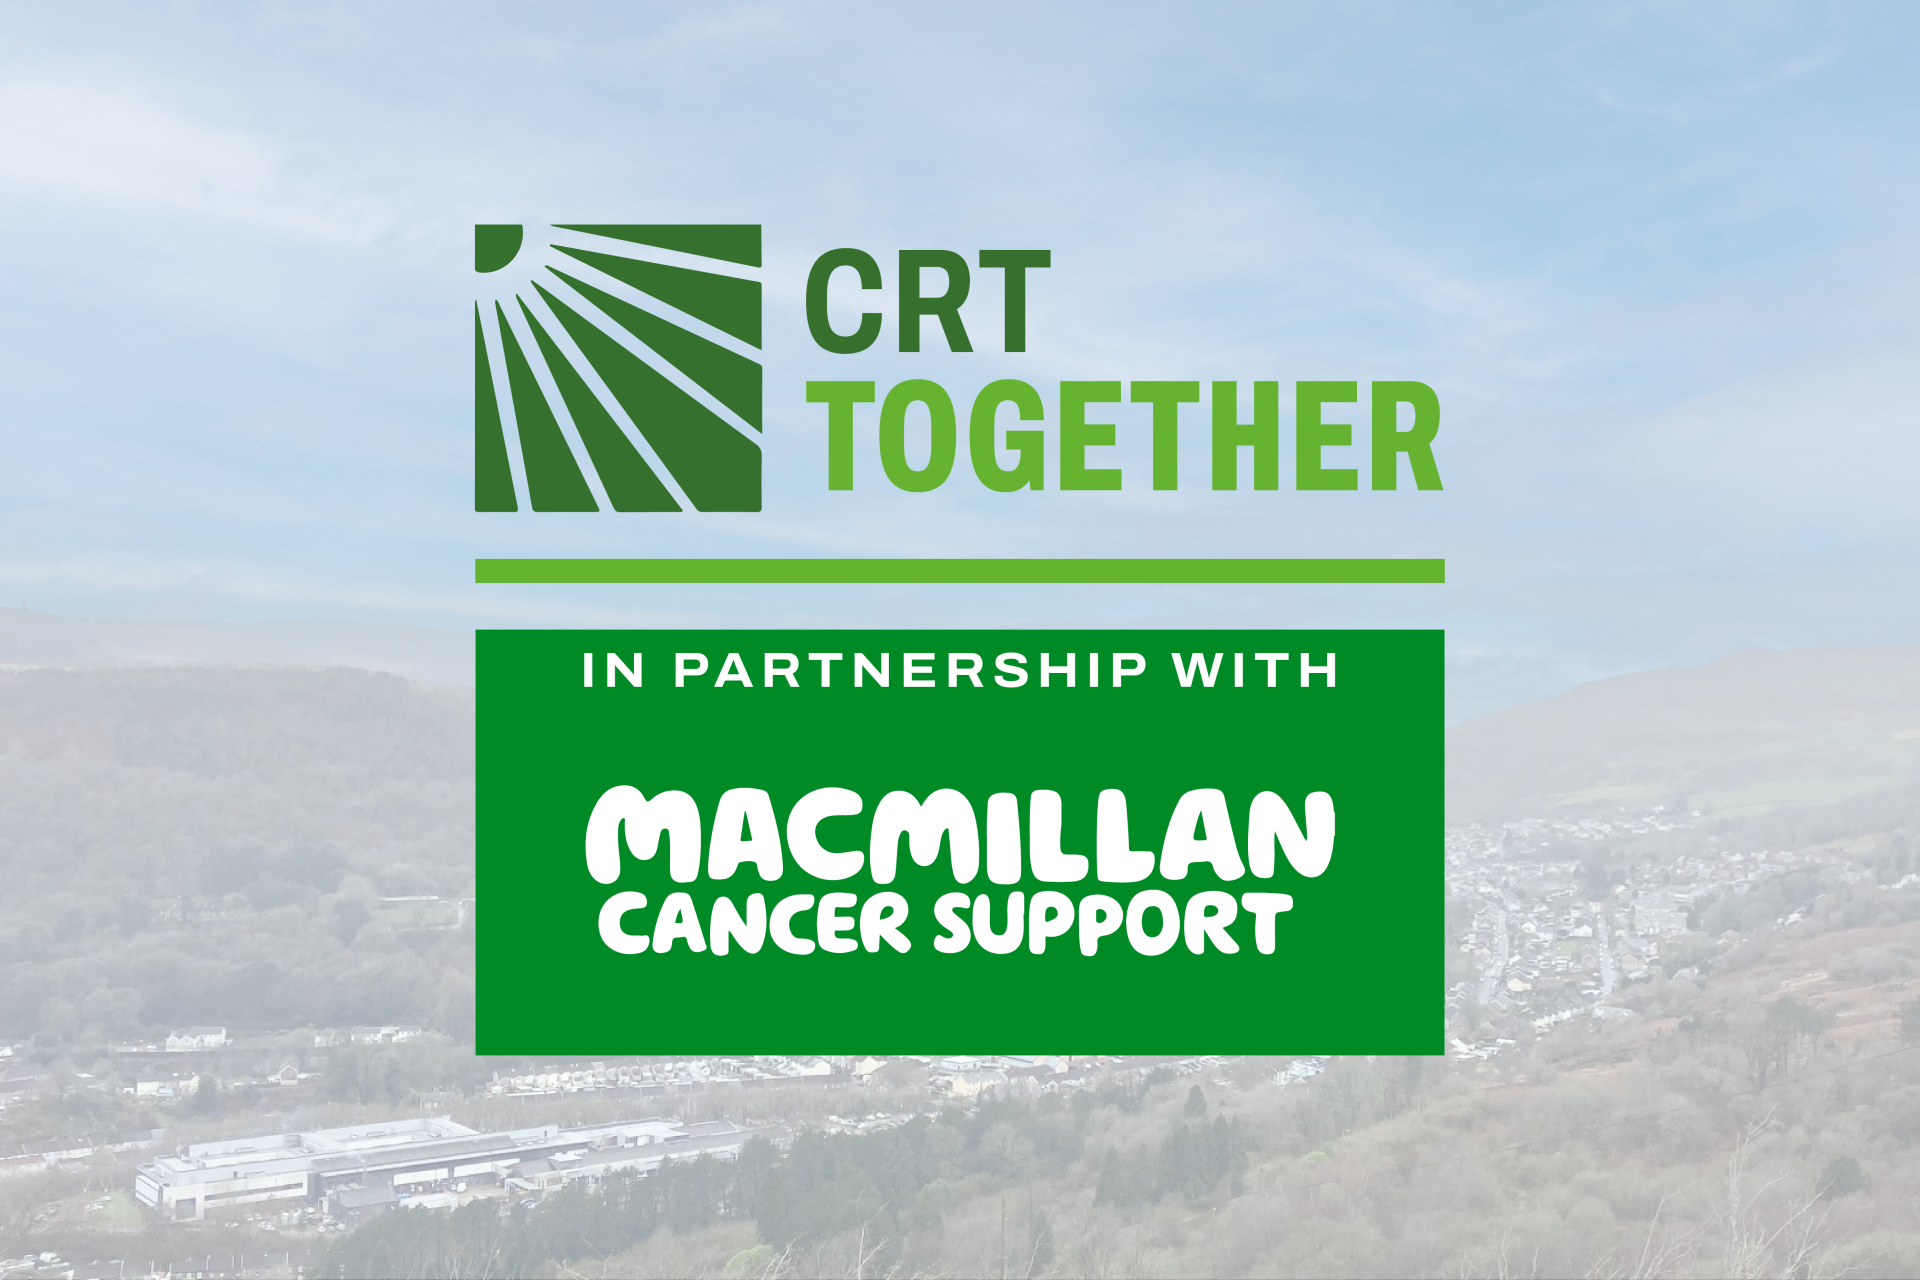 CRT Together in partnership with Macmillan